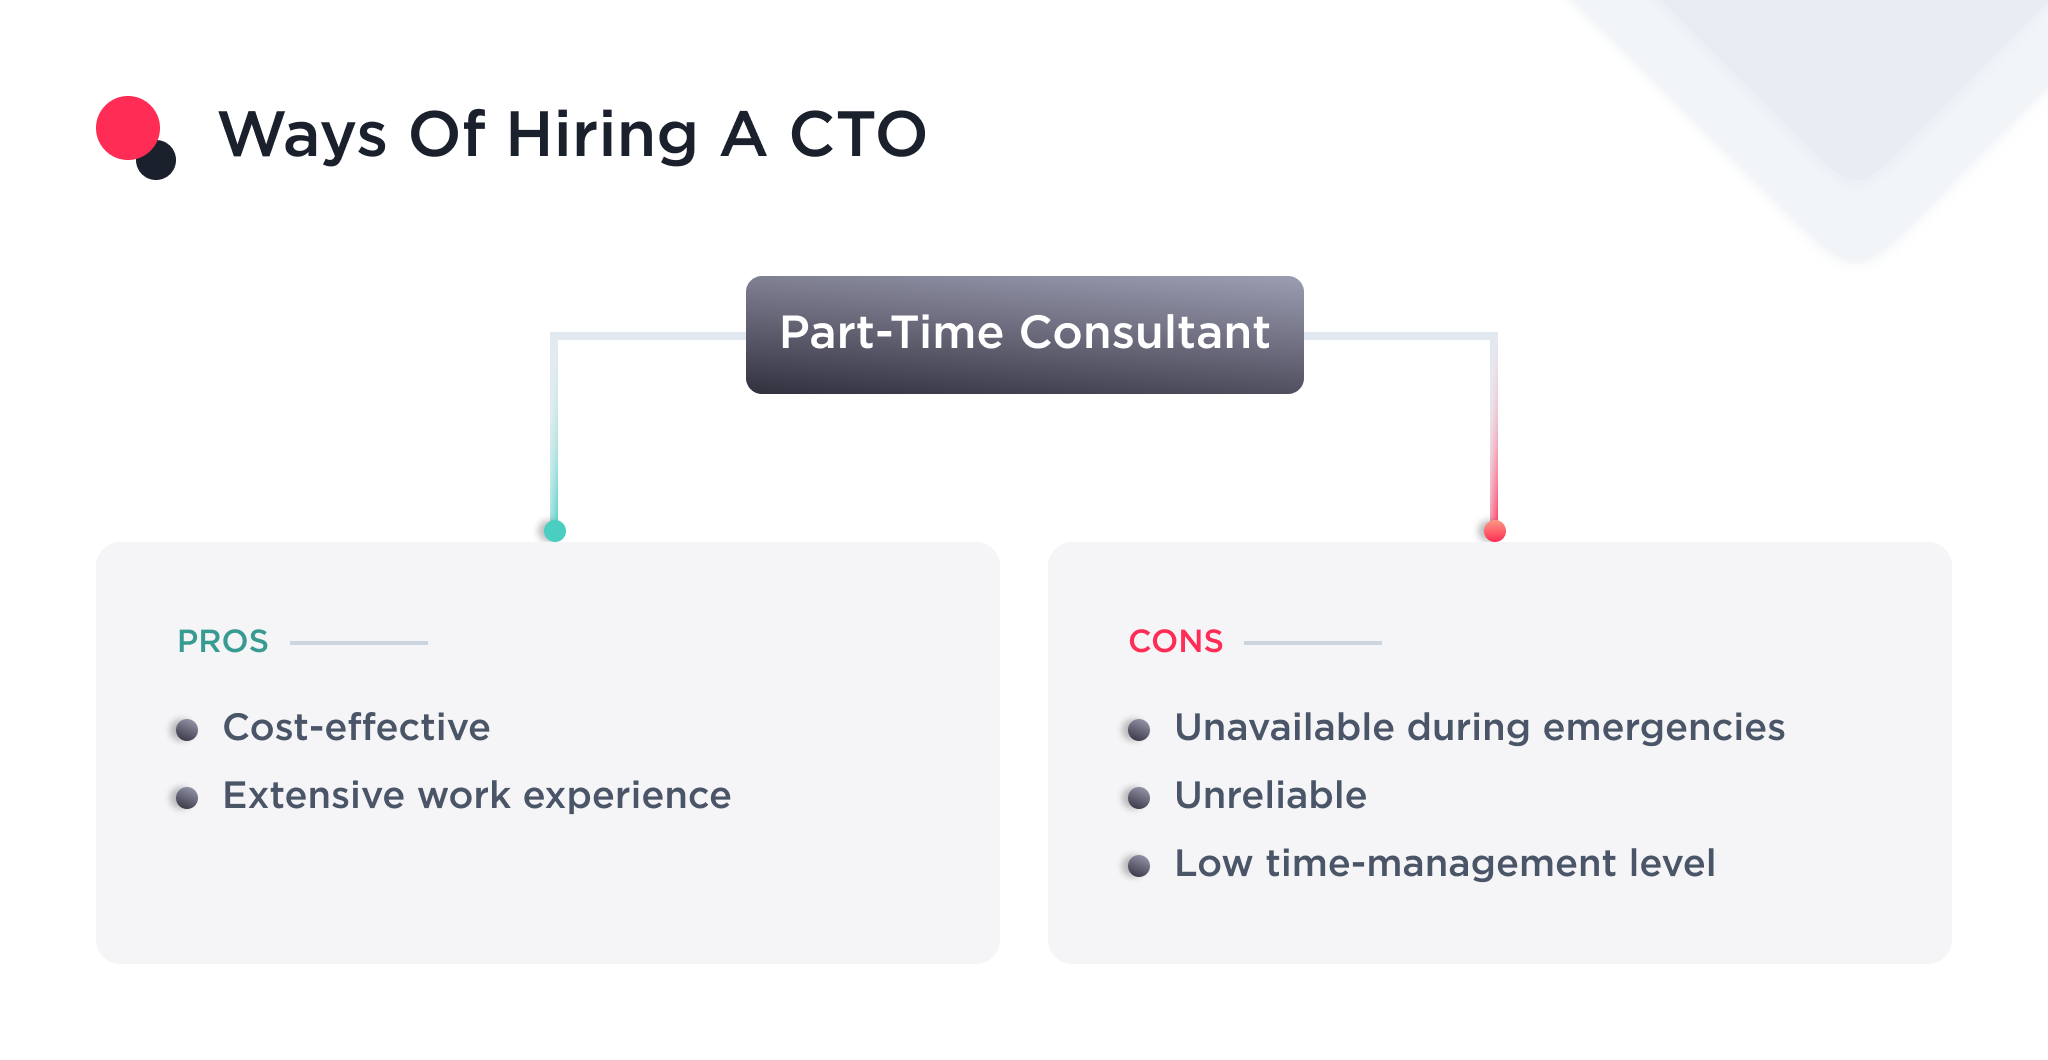 The image describe the part-time consultancy way of hiring a CTO